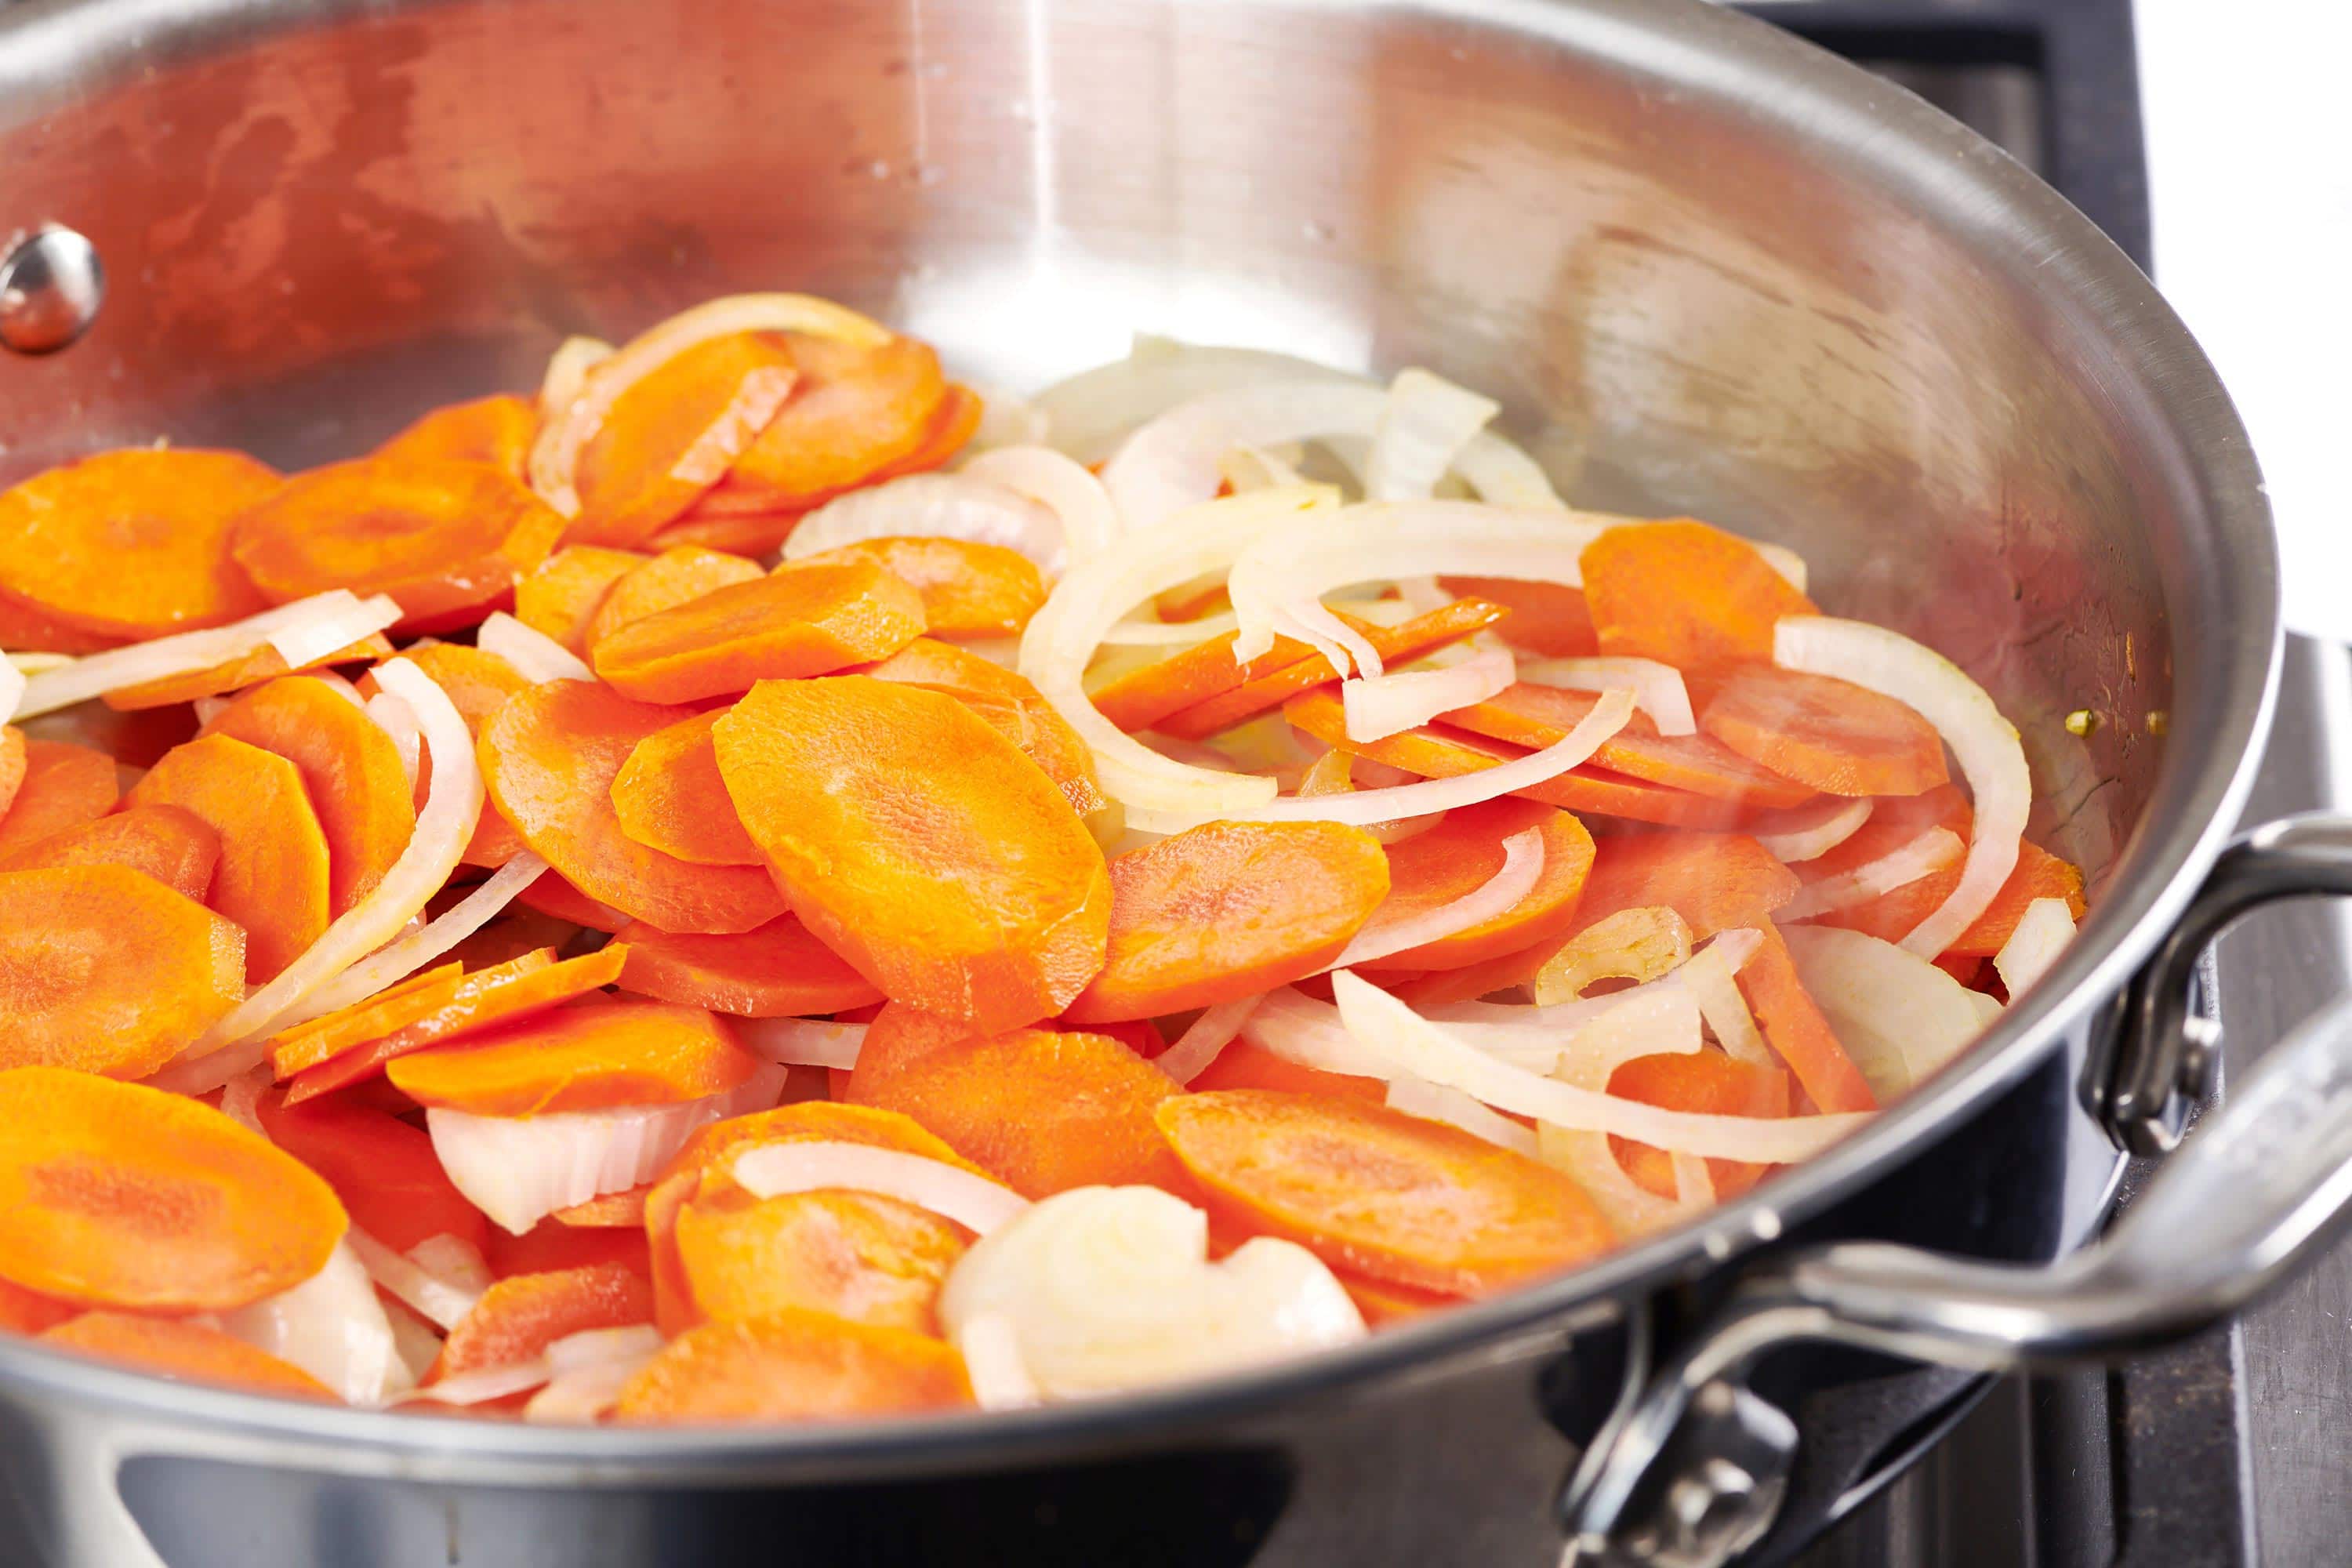 Sliced carrots and onions in a pan.